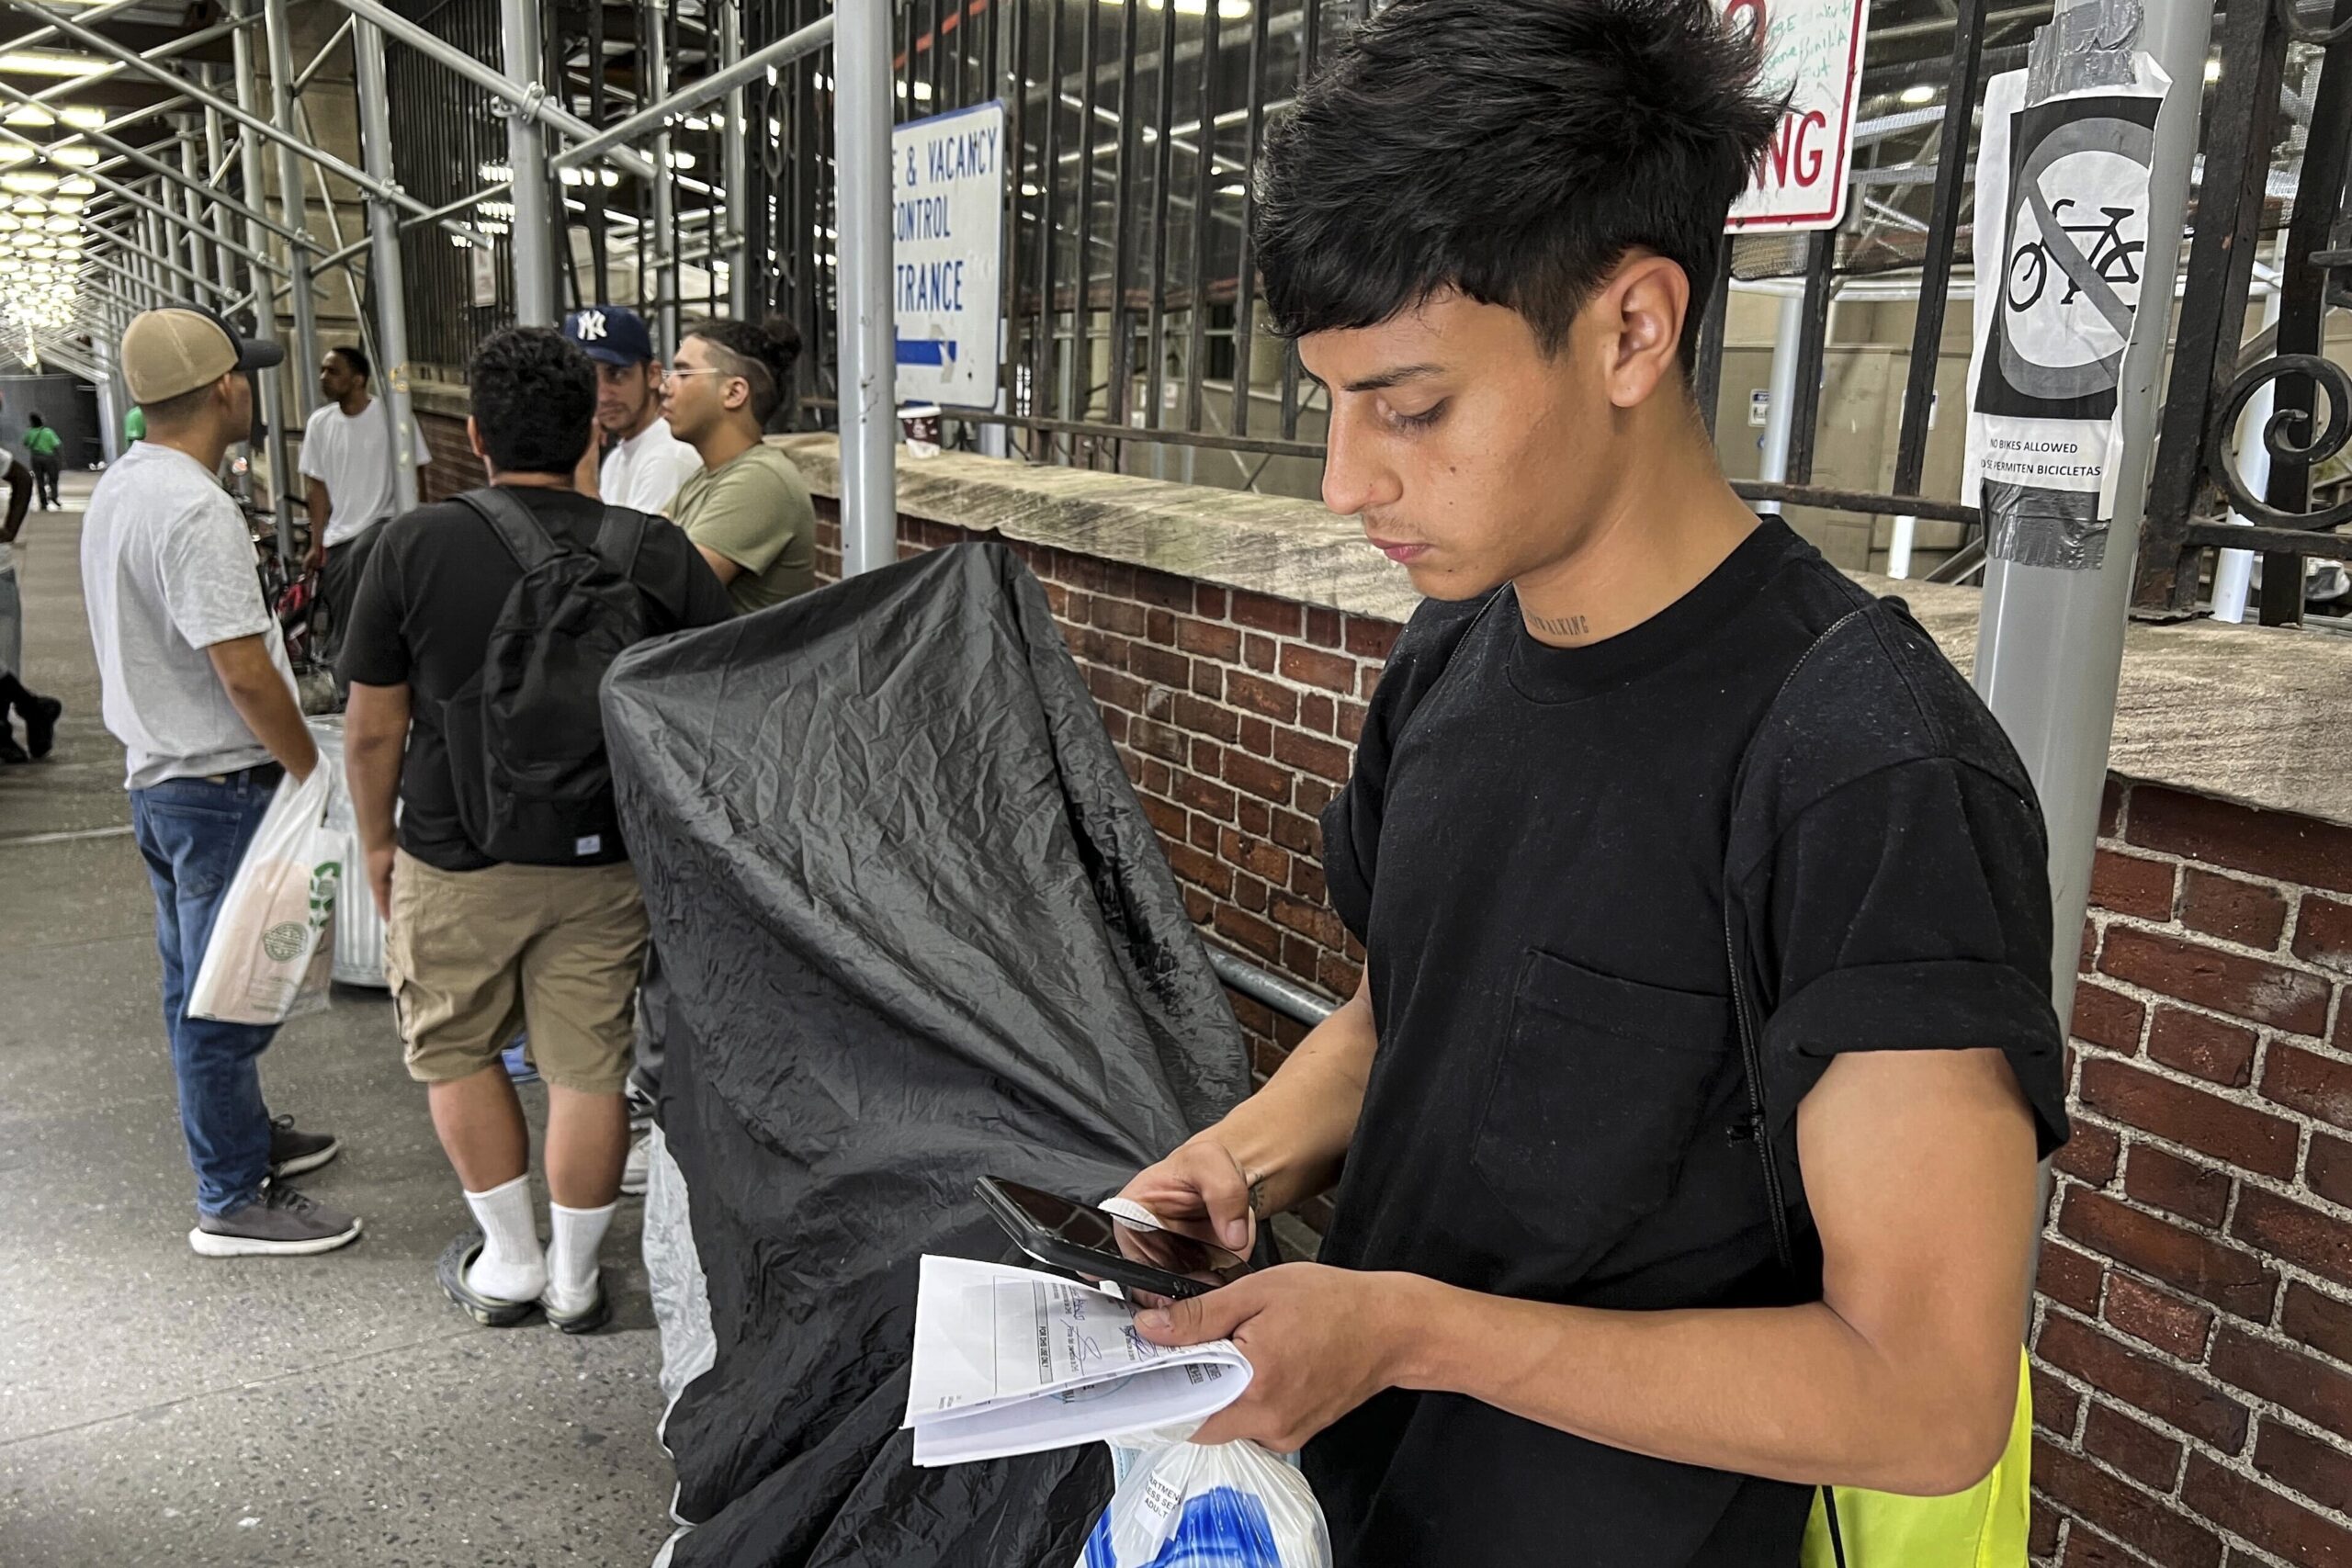 NYC weighs tents to house migrants as shelters fill - Washington Examiner